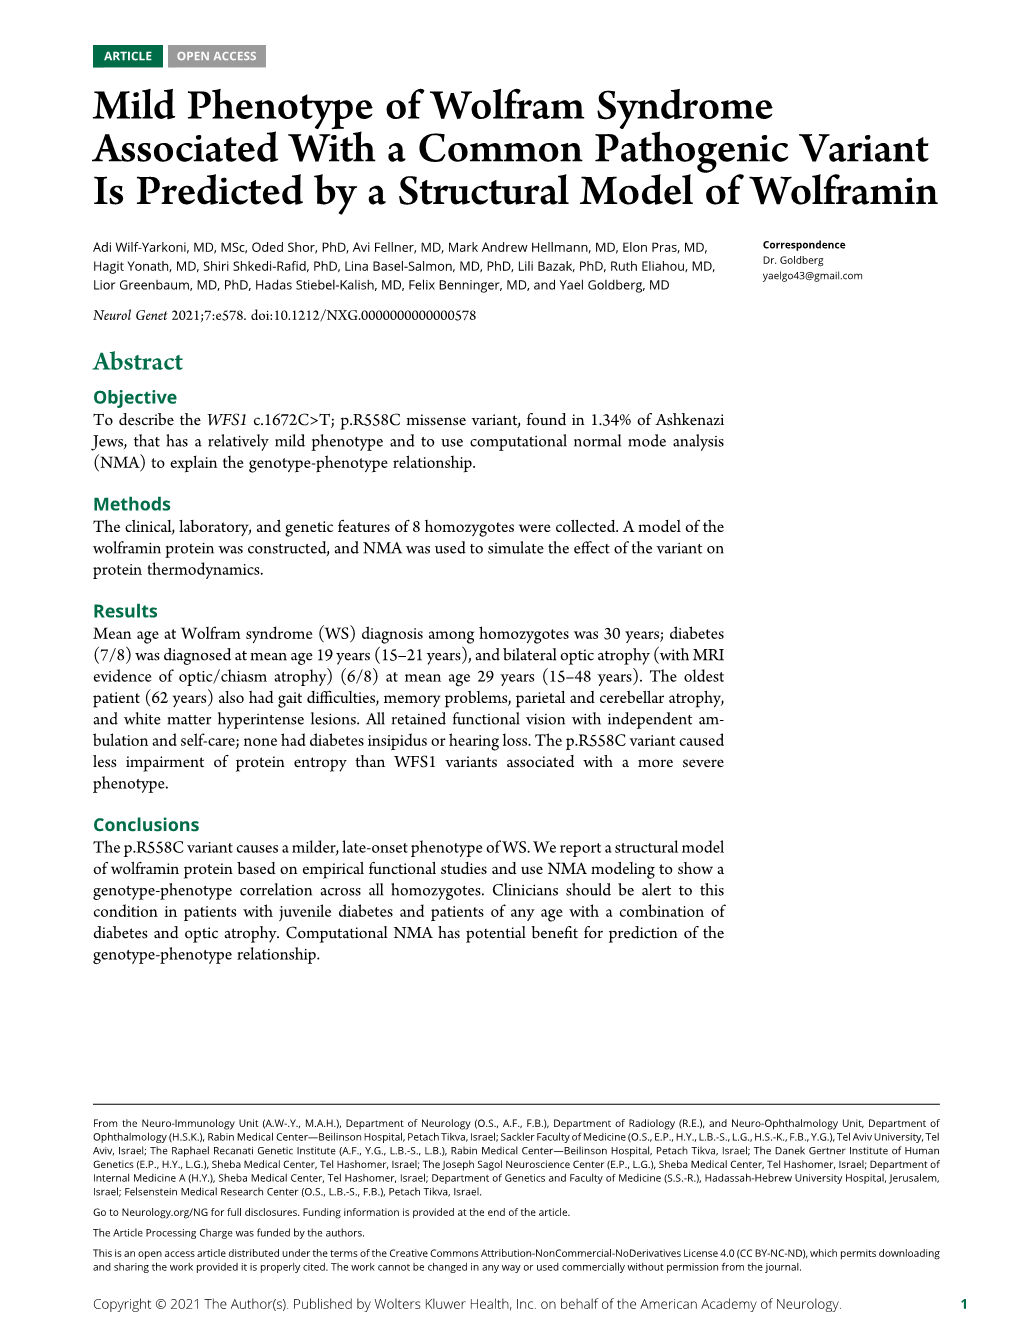 Mild Phenotype of Wolfram Syndrome Associated with a Common Pathogenic Variant Is Predicted by a Structural Model of Wolframin